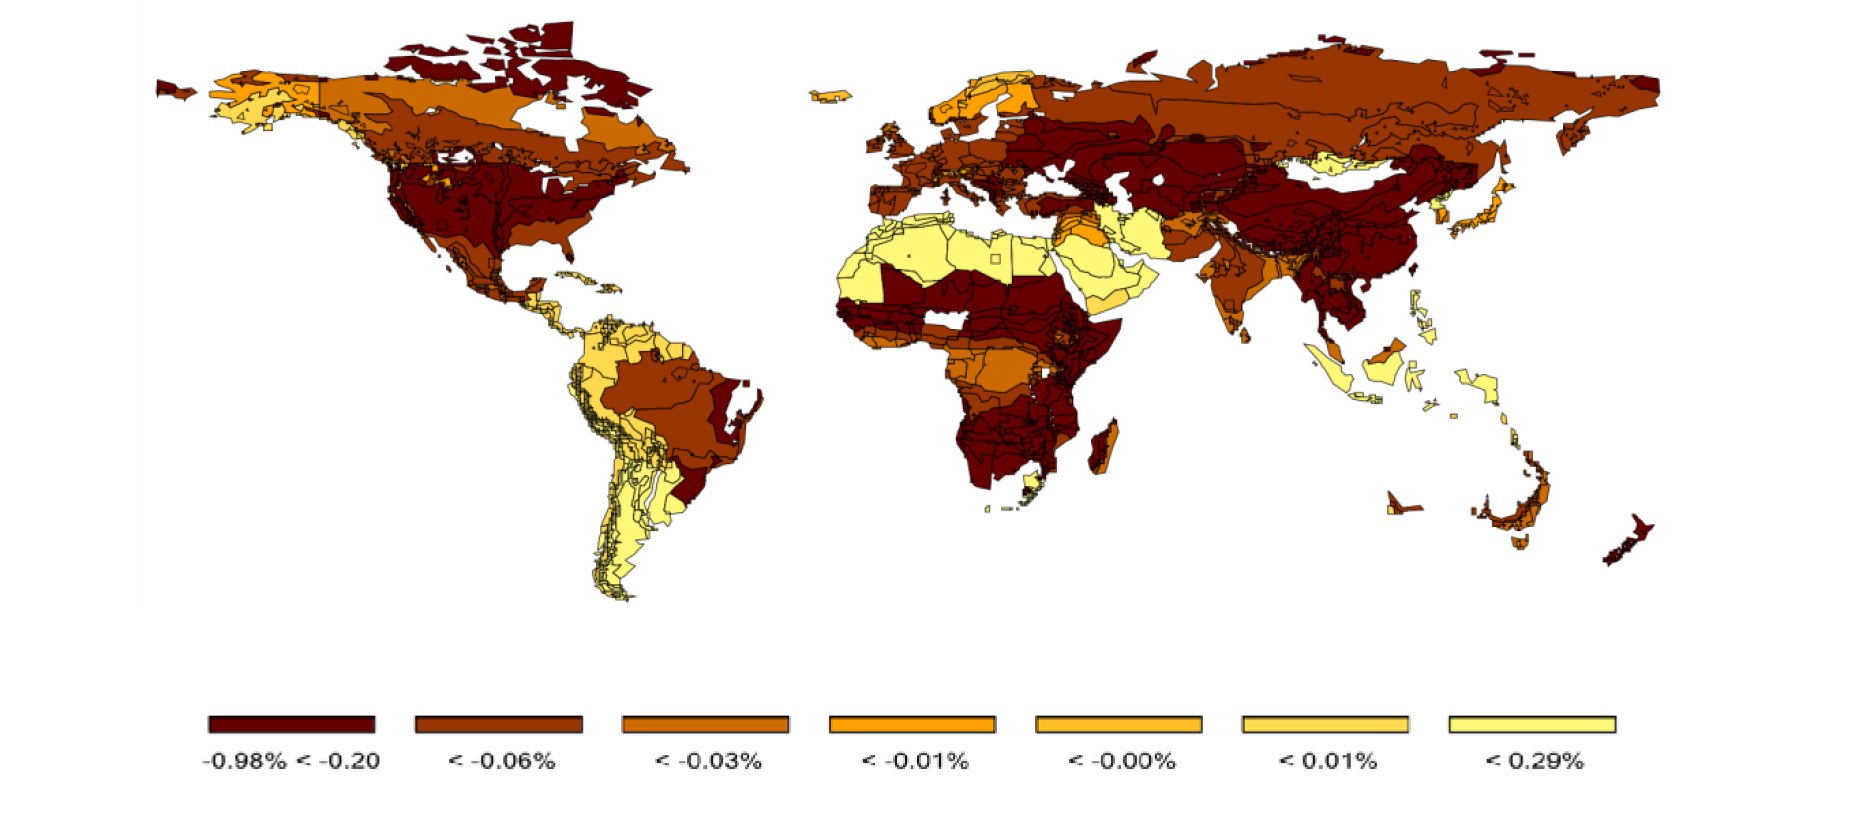 The figure shows the predicted decline in forested areas across the world